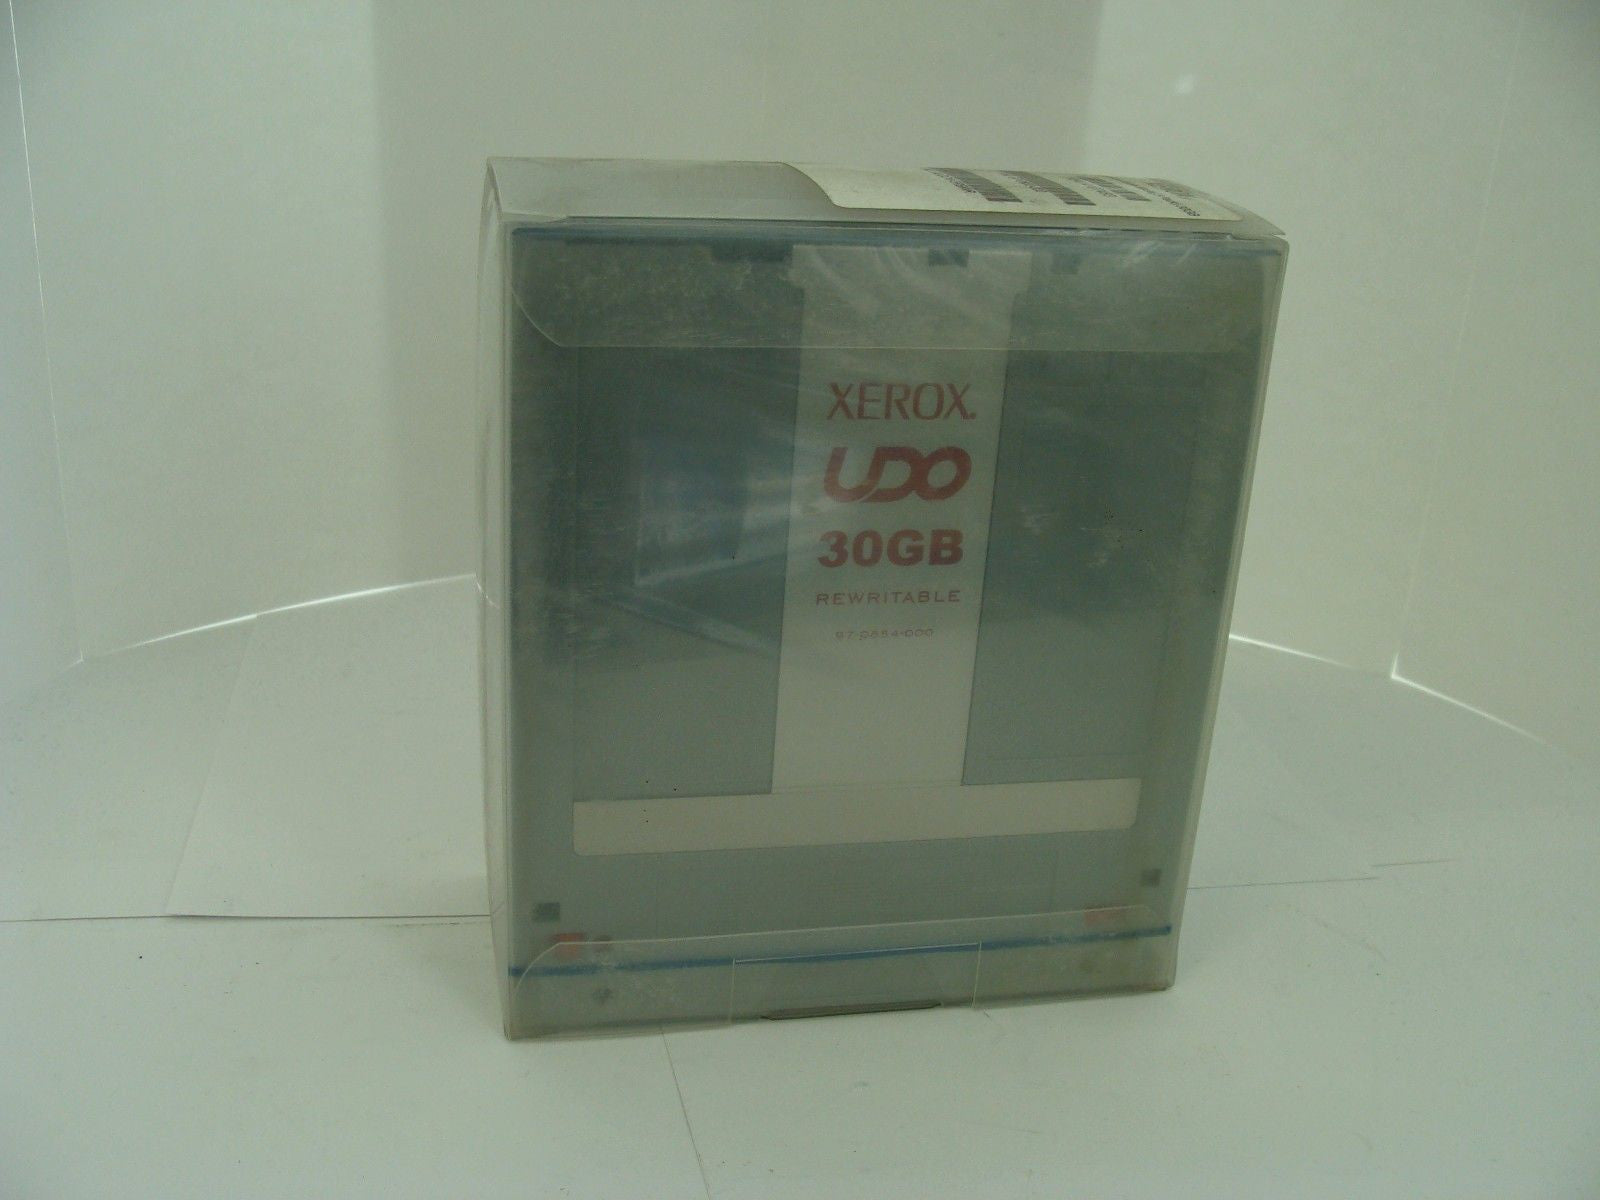 *NEW* Xerox UDO30GBRW Optical Disk 97-0852-000 5.25" Rewritable Media - Sealed - Micro Technologies (yourdrives.com)